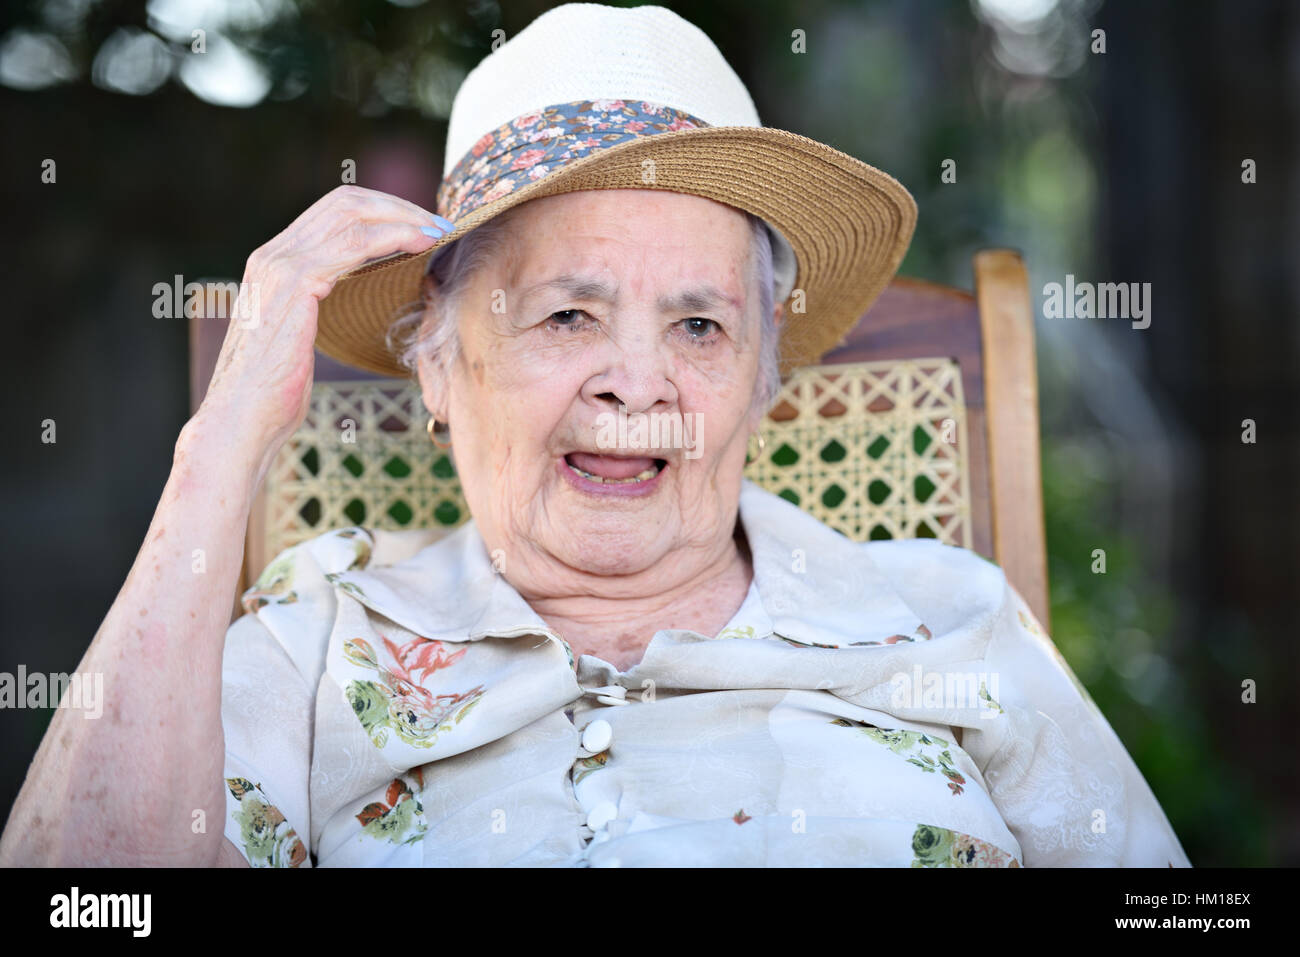 smiling grandma with hat on outside in park Stock Photo